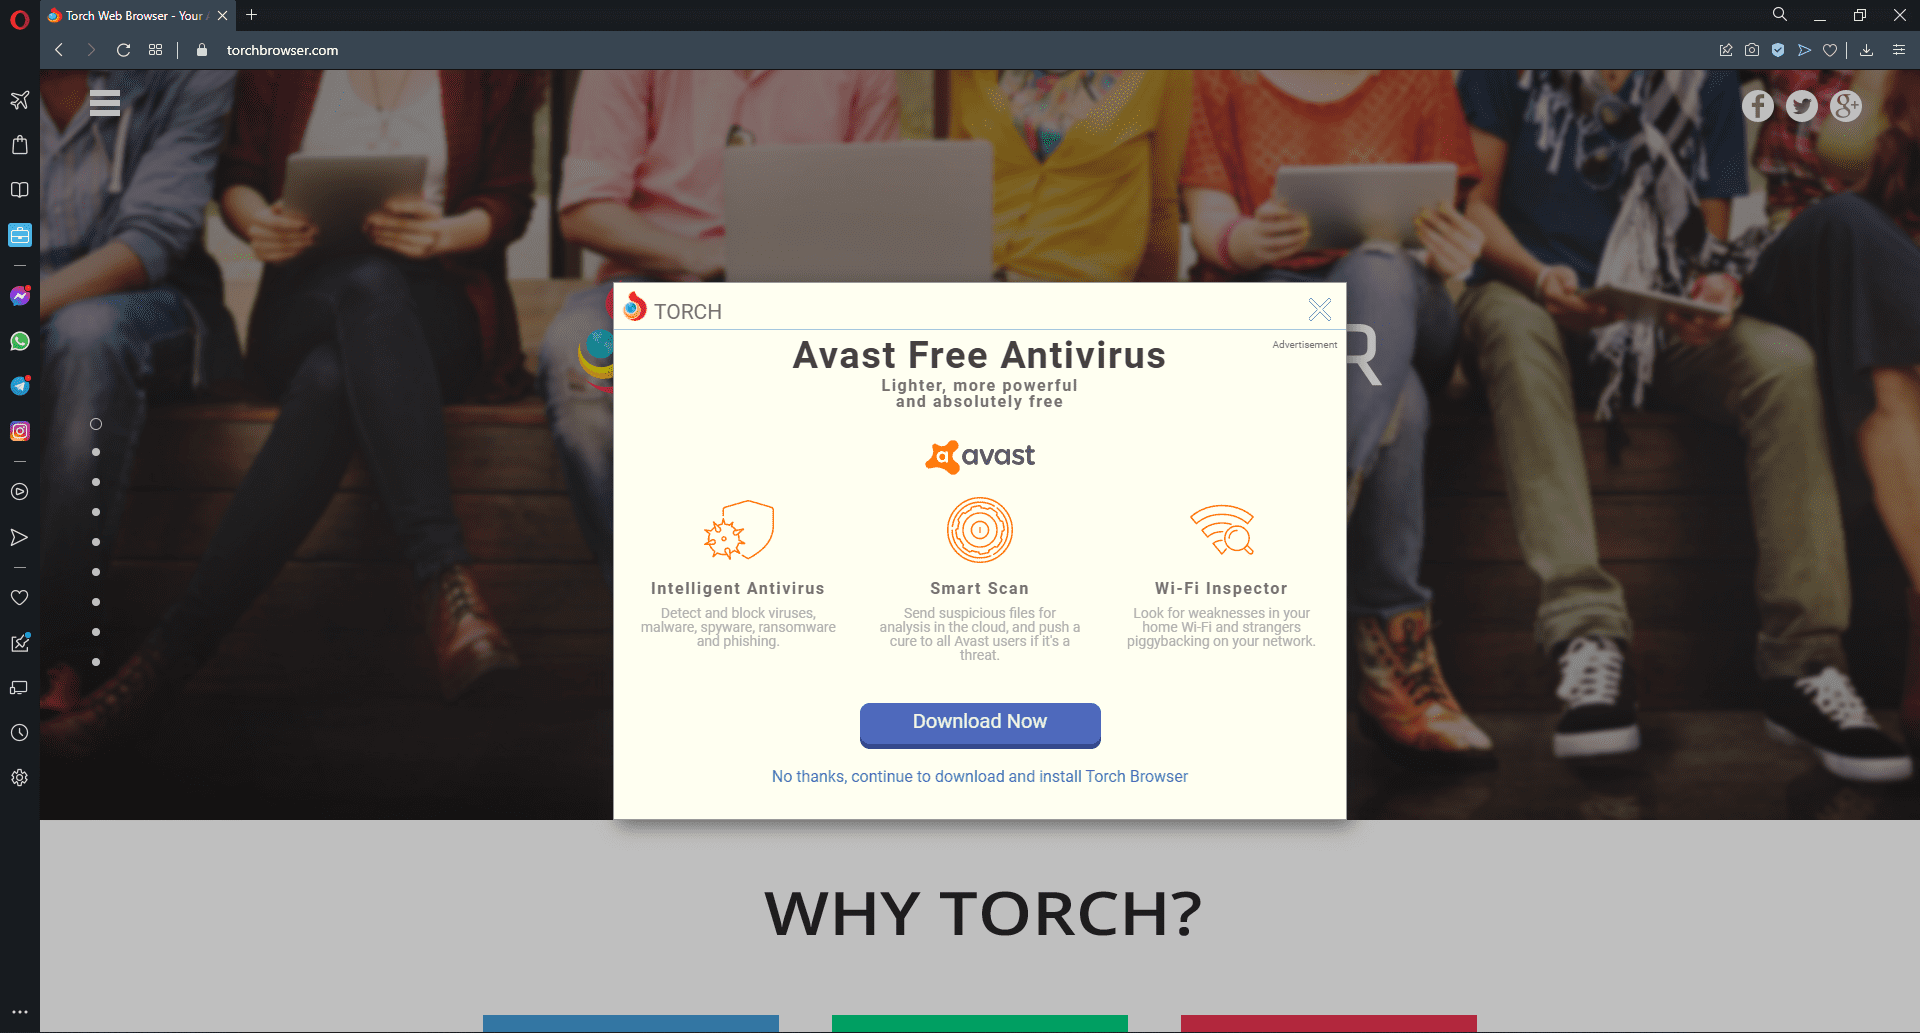 Users can't install Torch Browser.